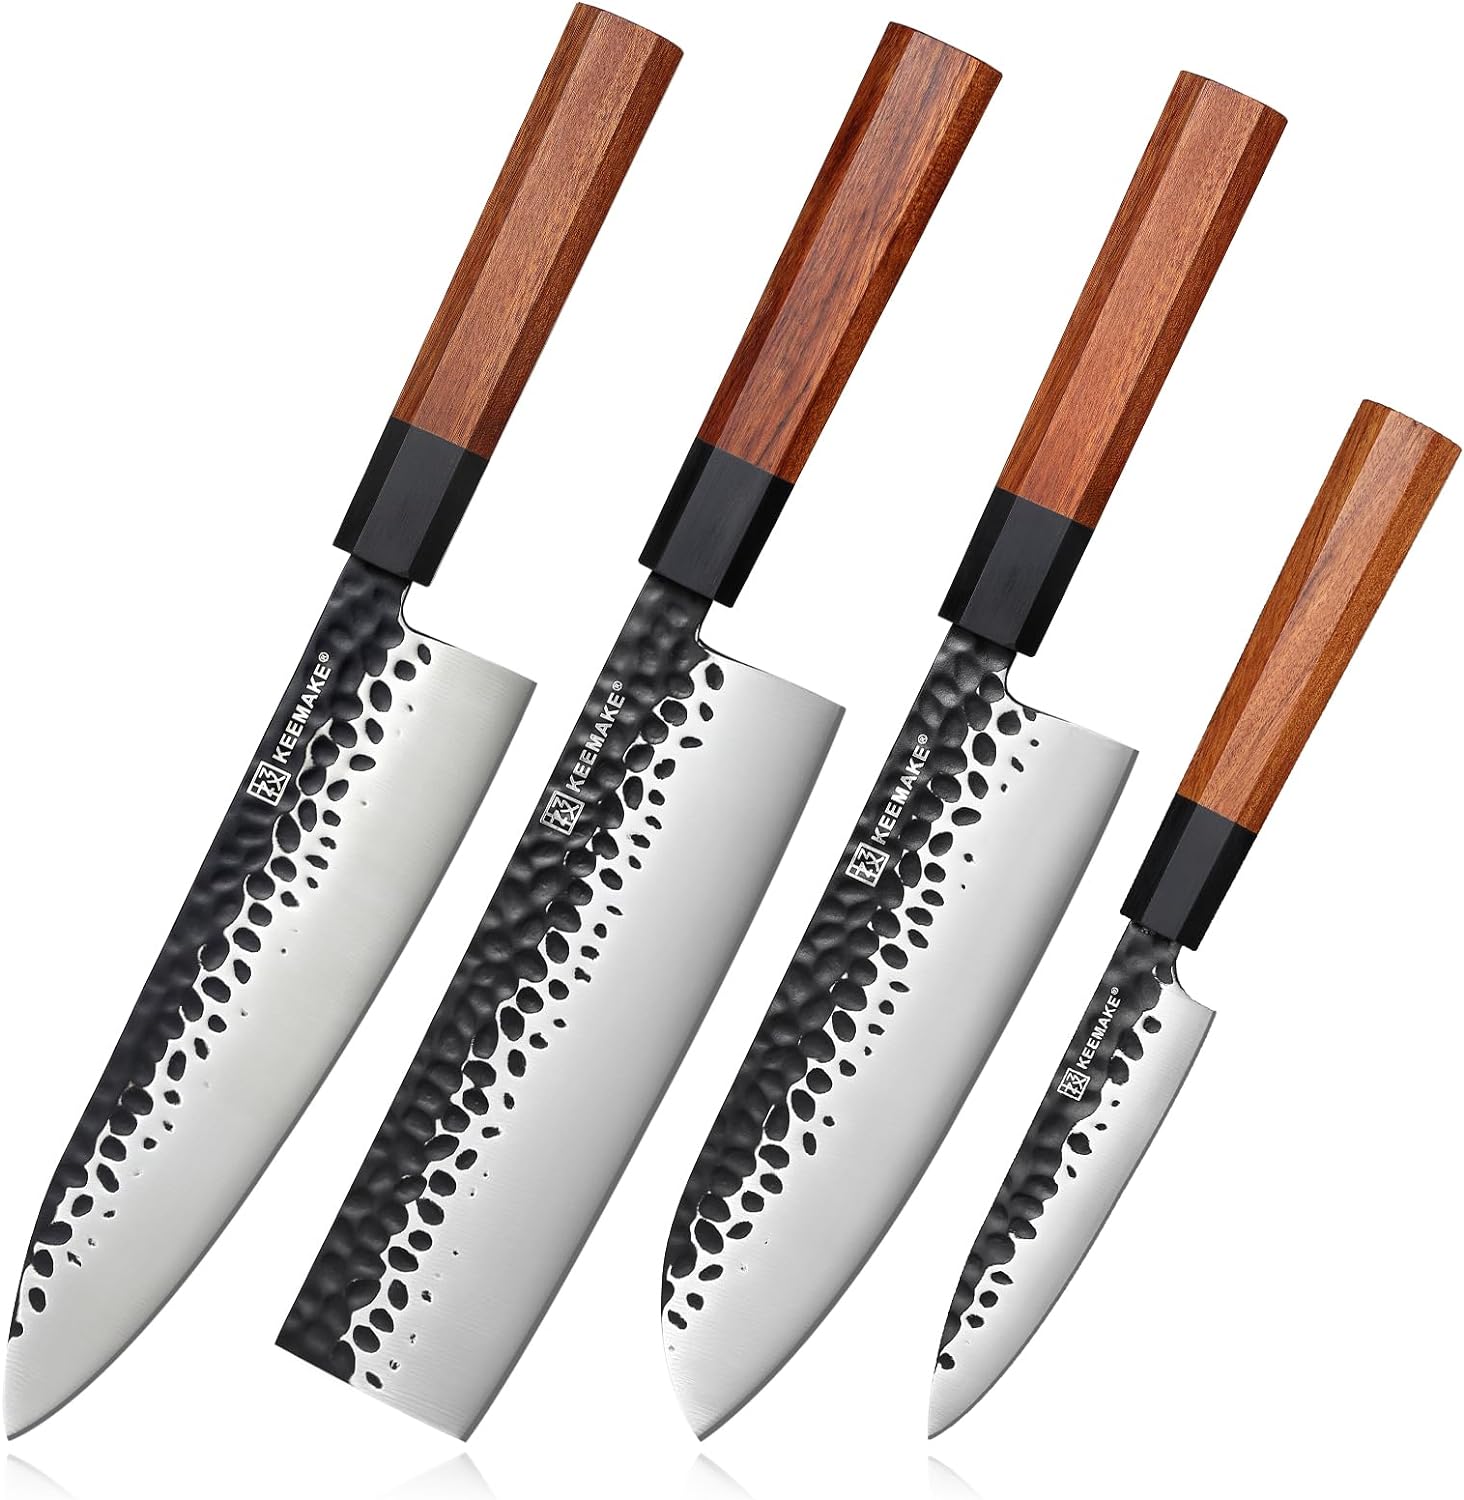 KEEMAKE Knife Set of 4pcs, Kitchen Knife Set with Japanese 440C Stainless Steel Blade Chef Knife Set with Octagon Rosewood Handle